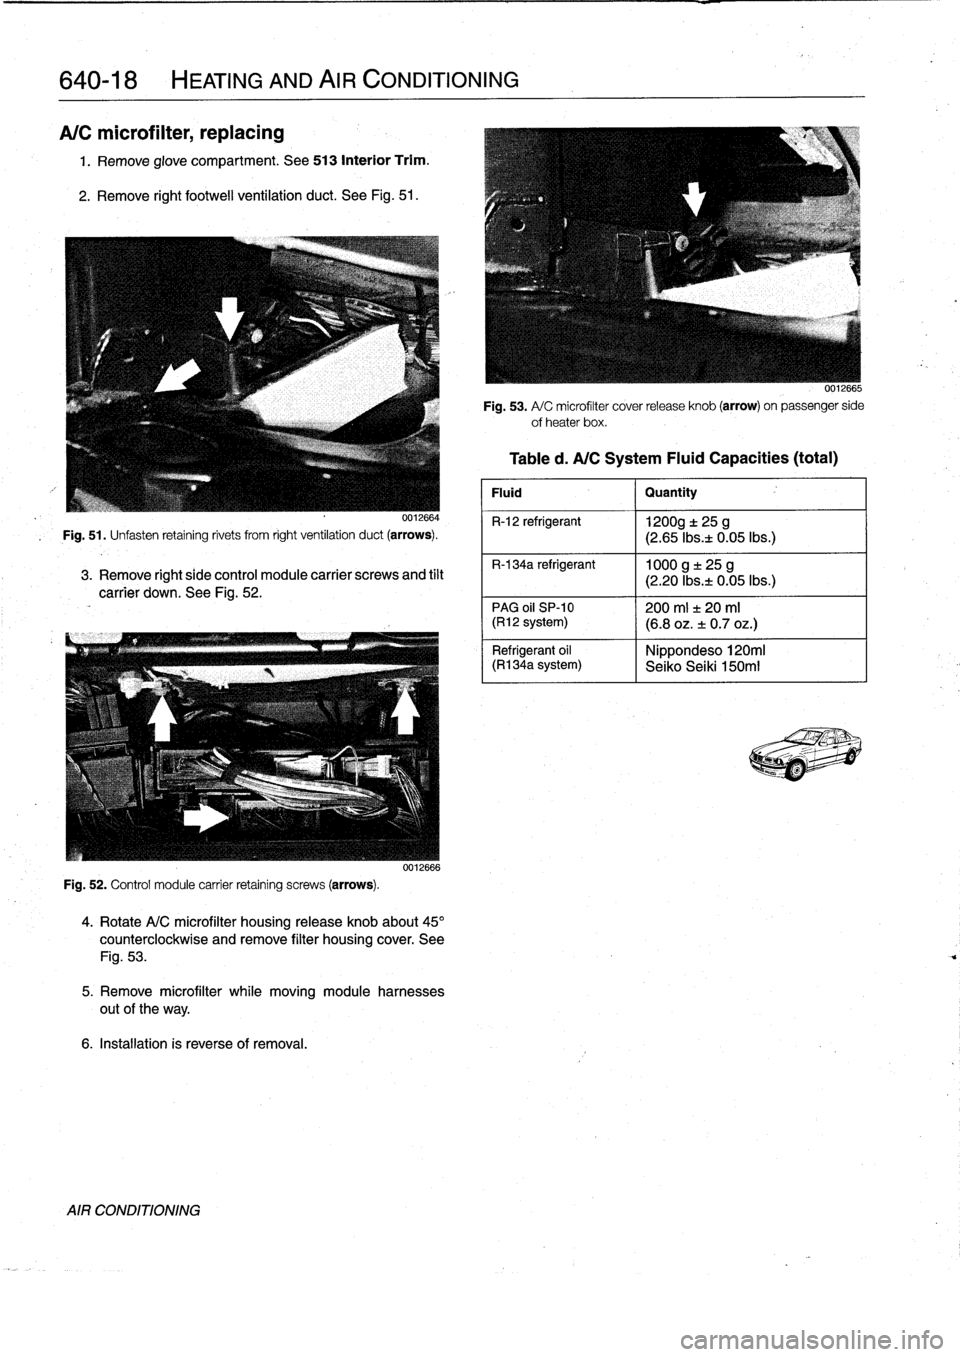 BMW 323i 1993 E36 Workshop Manual 
640-18

	

HEATING
AND
AIR
CONDITIONING

A/C
microfilter,
replacing

1
.
Remove
glove
compartment
.
See
513
Interior
Trim
.

2
.
Remove
right
footwell
ventilation
duct
.
See
Fig
.
51
.

0012664

Fig
